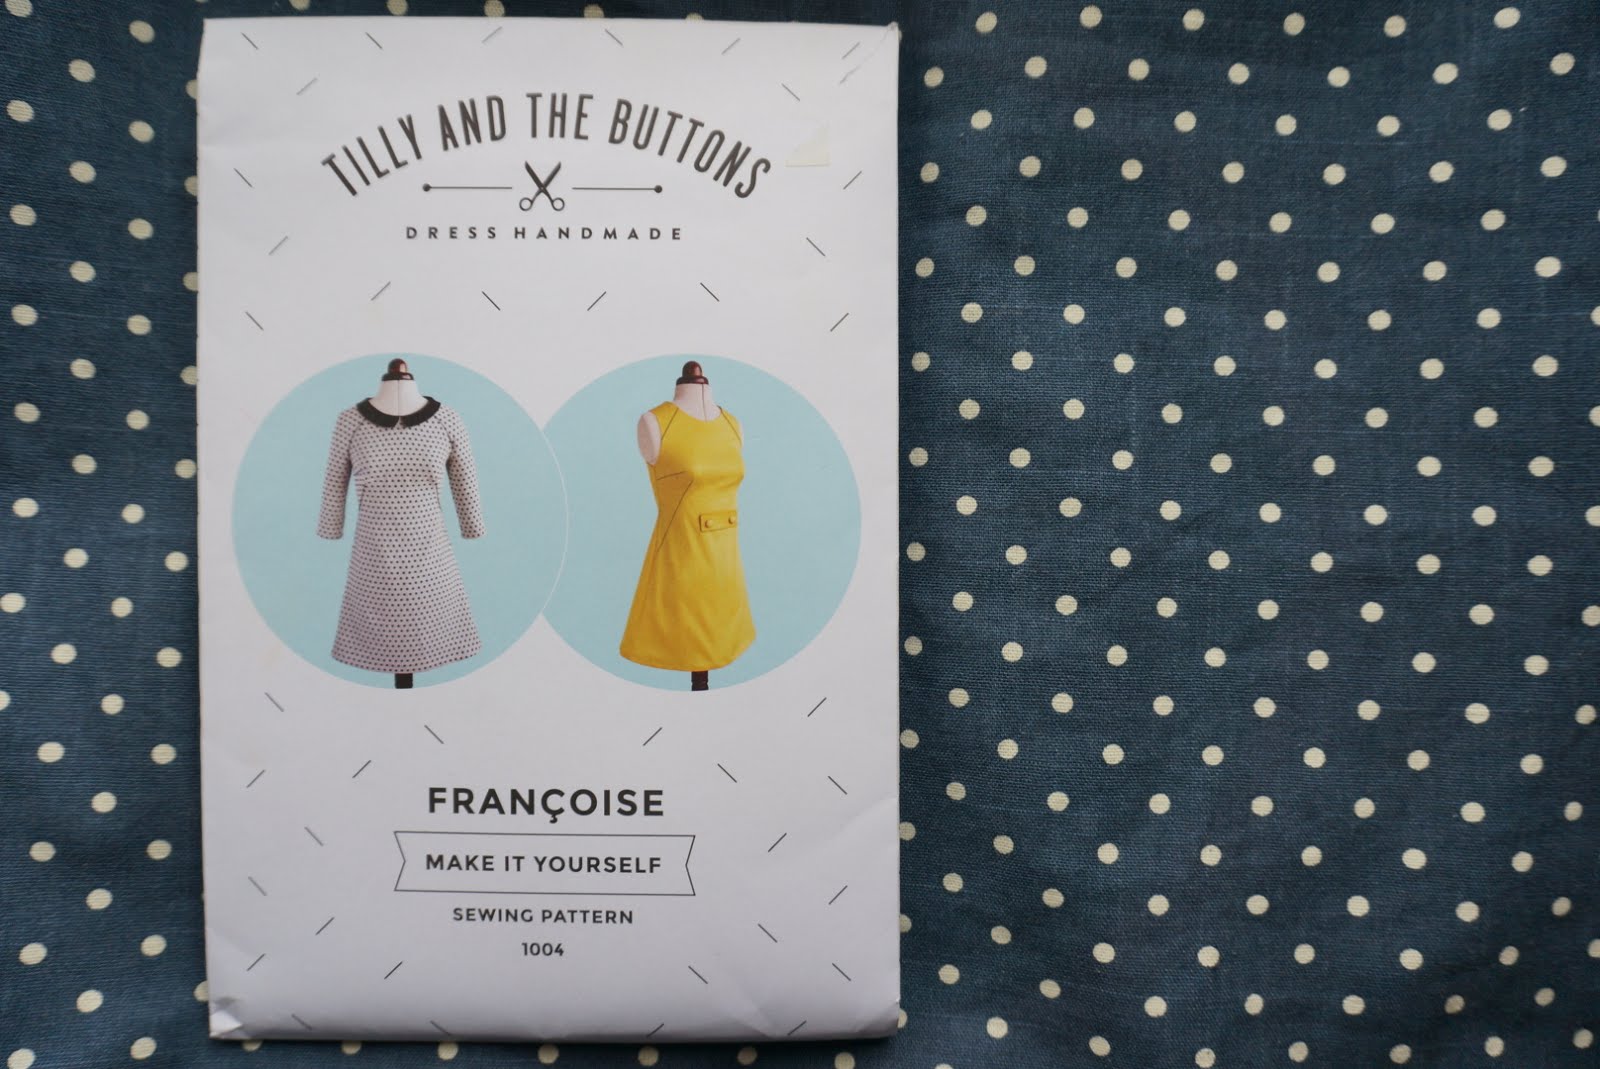 Tilly and the Buttons: Understanding Sewing Pattern Markings